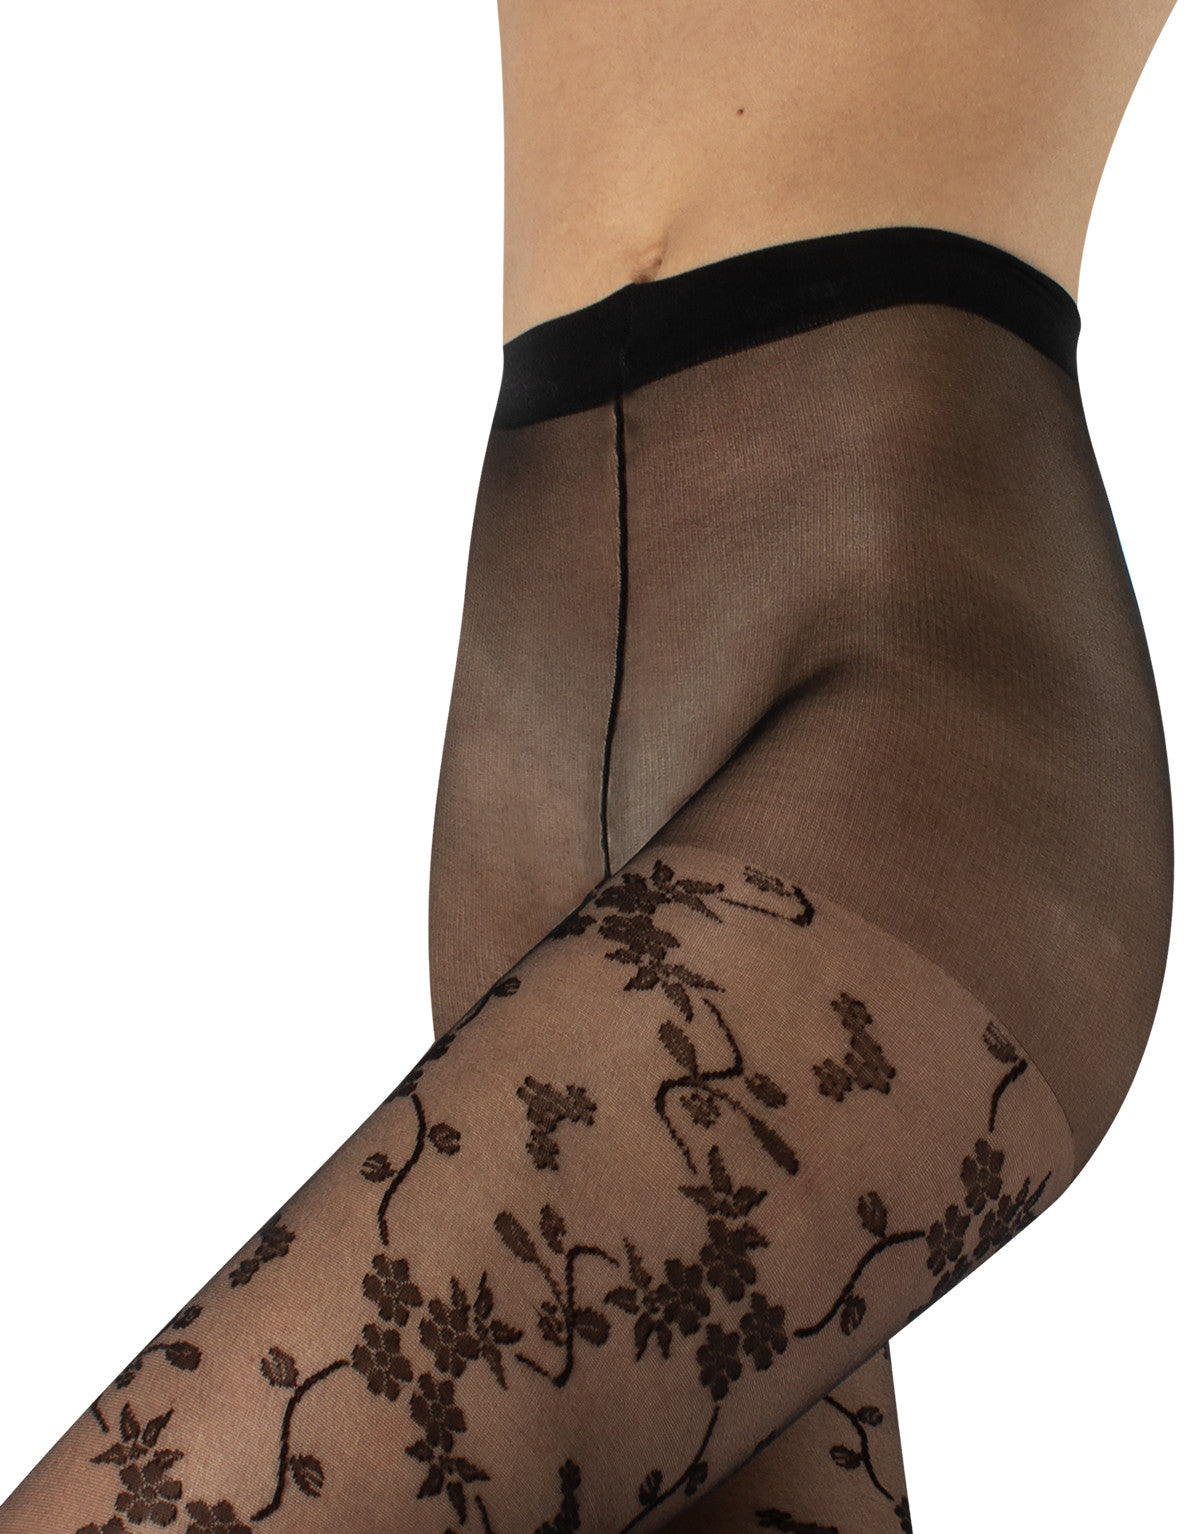 Calzitaly Floral Tights - Sheer black fashion tights with a woven floral lace style pattern, plain semi-opaque boxer brief, deep waistband, flat seams and cotton gusset.